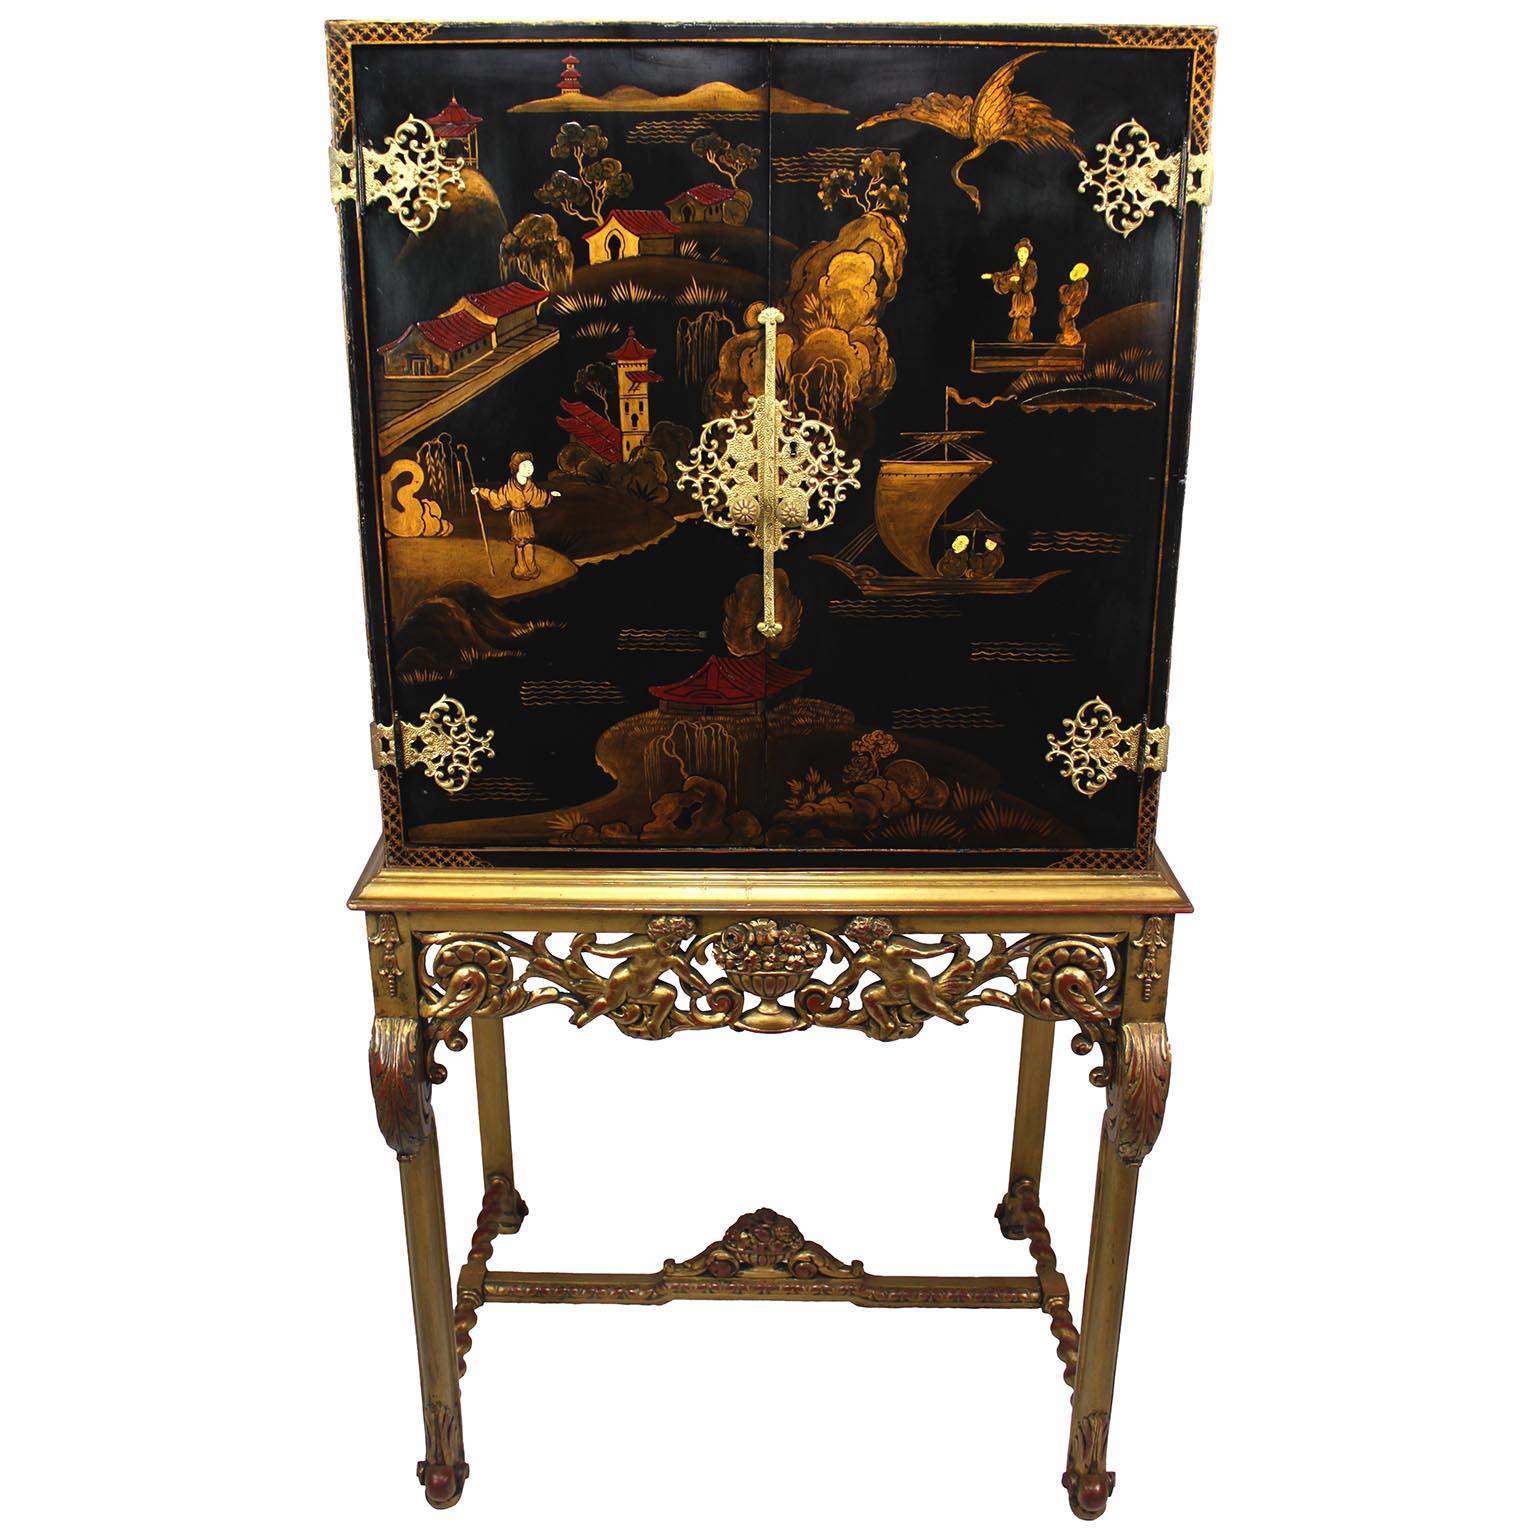 A Franco-English 19th/20th Century Chinoiserie Style Two-Door Cabinet on Stand, the black-laquered top with parcel-gilt and painted Chinese decorations of villages and coastal scenes, the inside with paneled dividers for file storage and a single